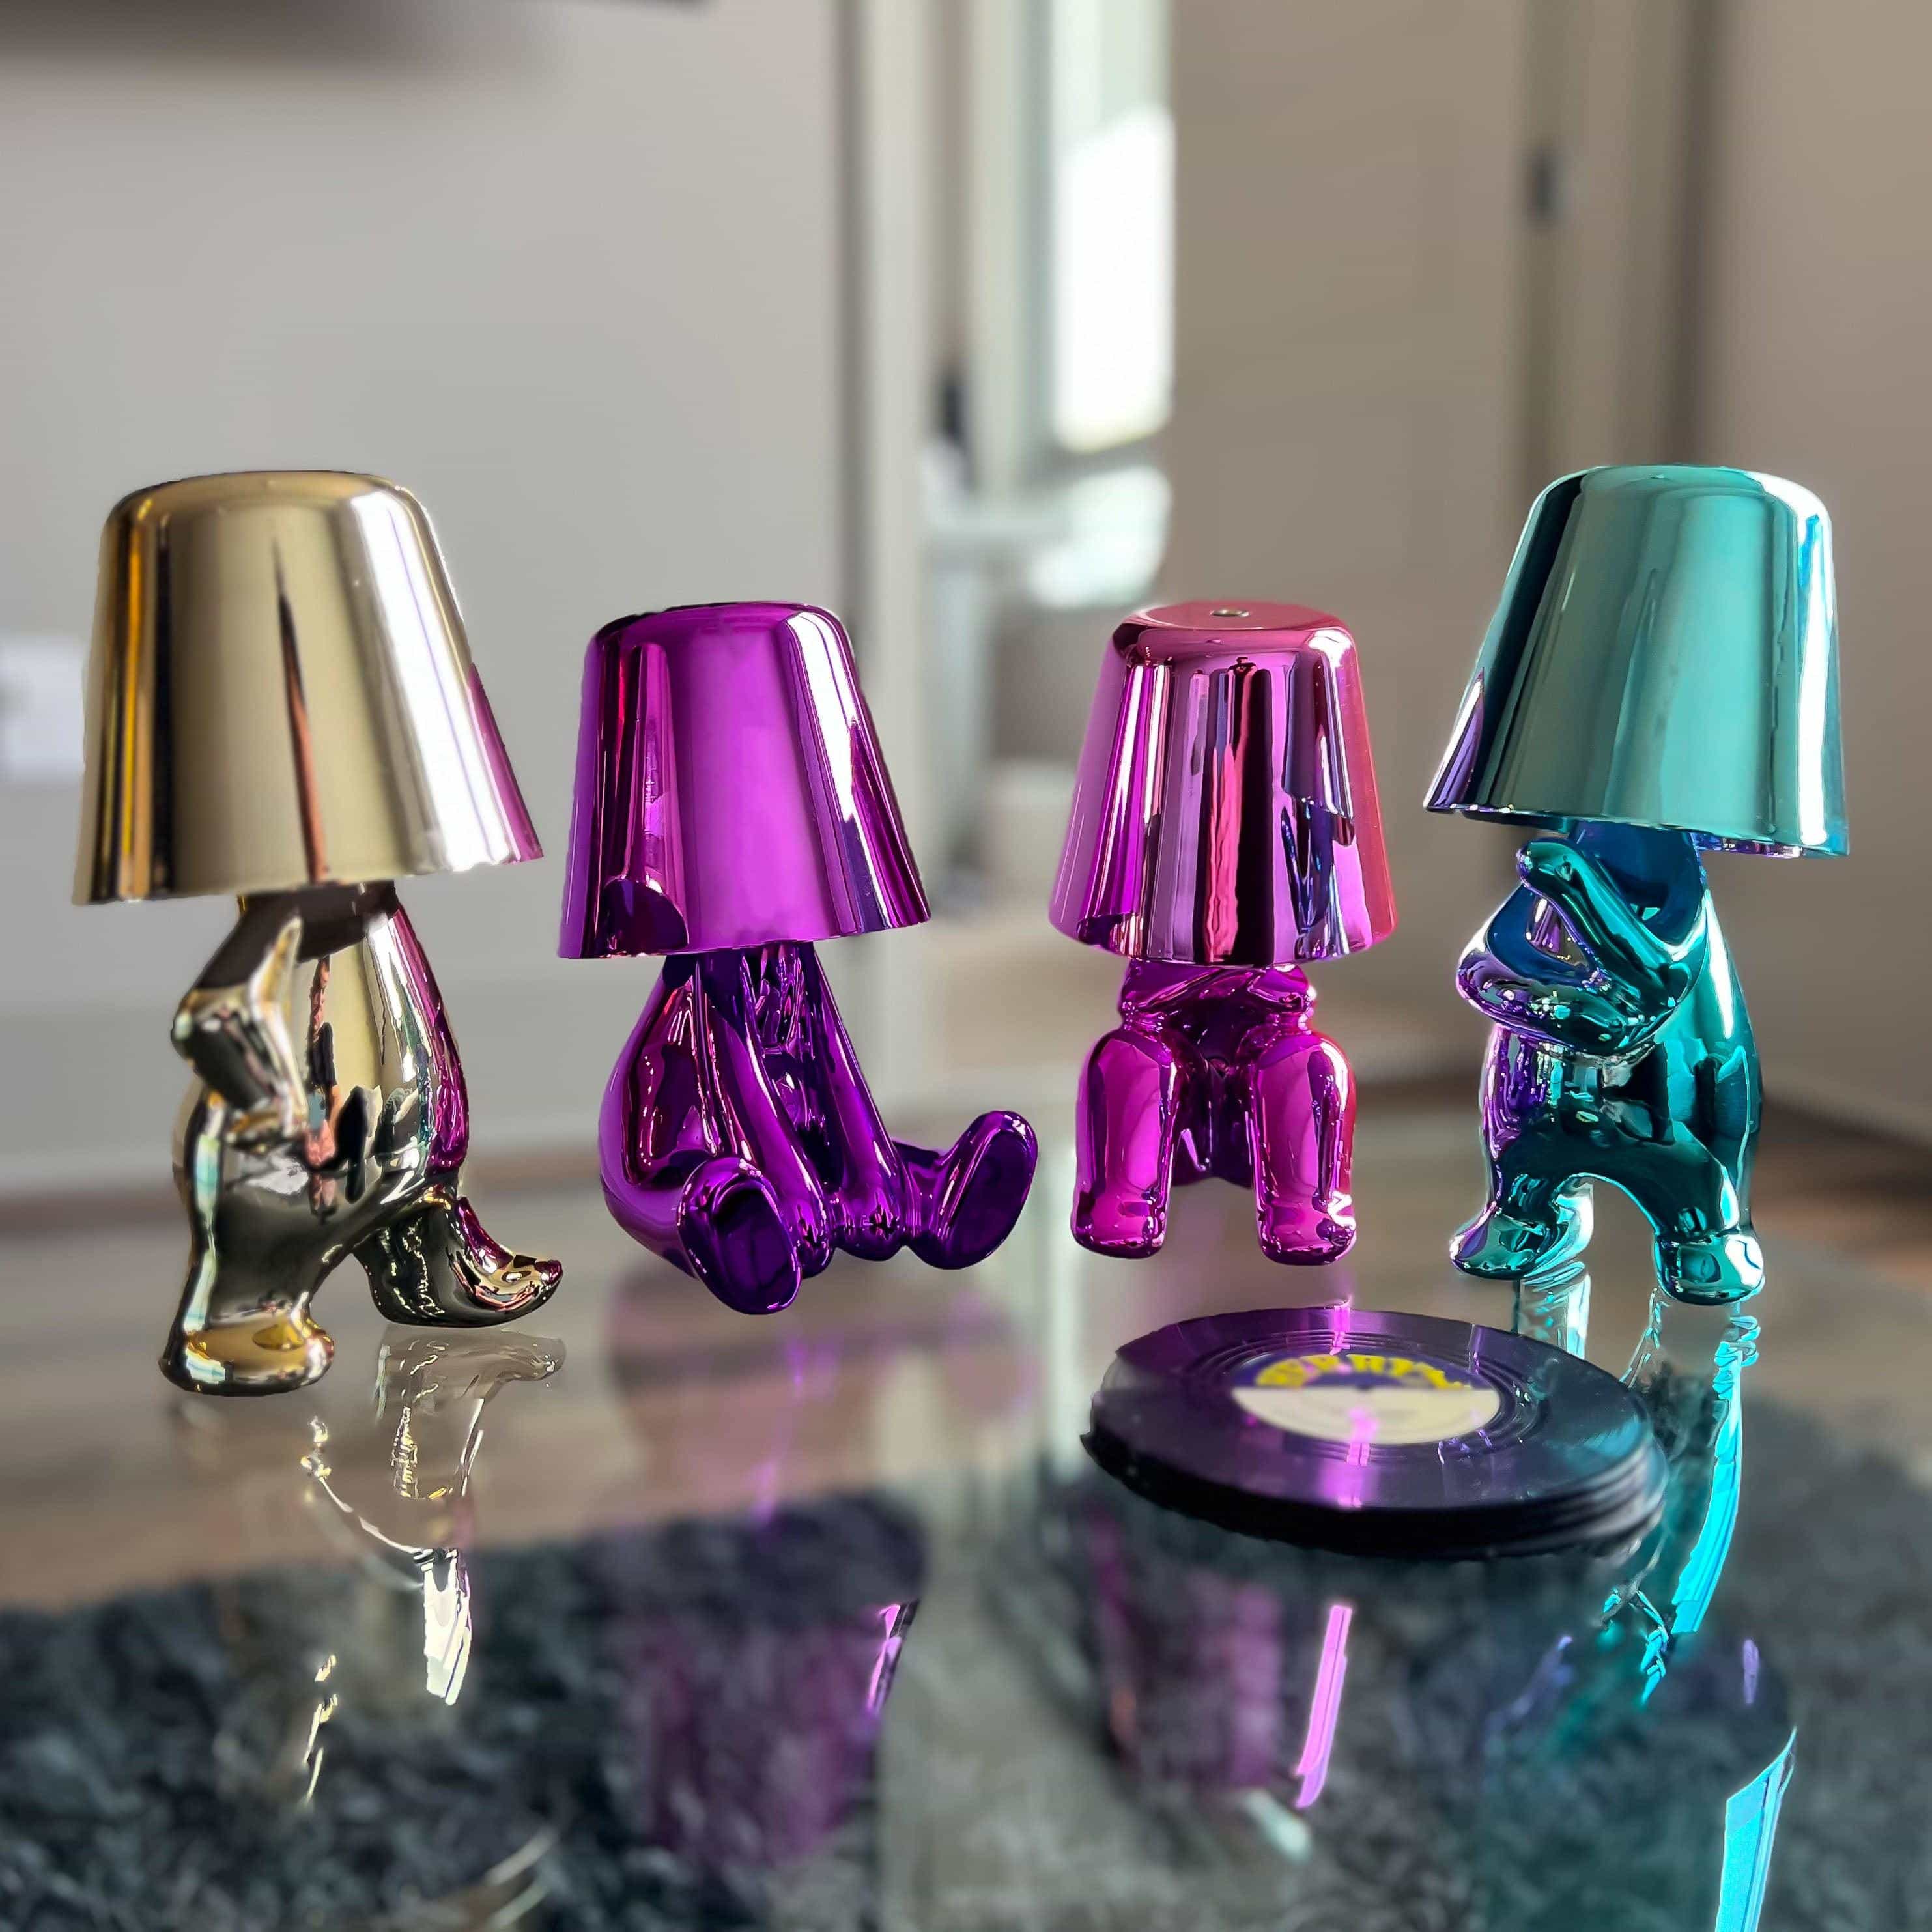 Colorful Thinkers - Lamp Collection - Casa Di Lumo